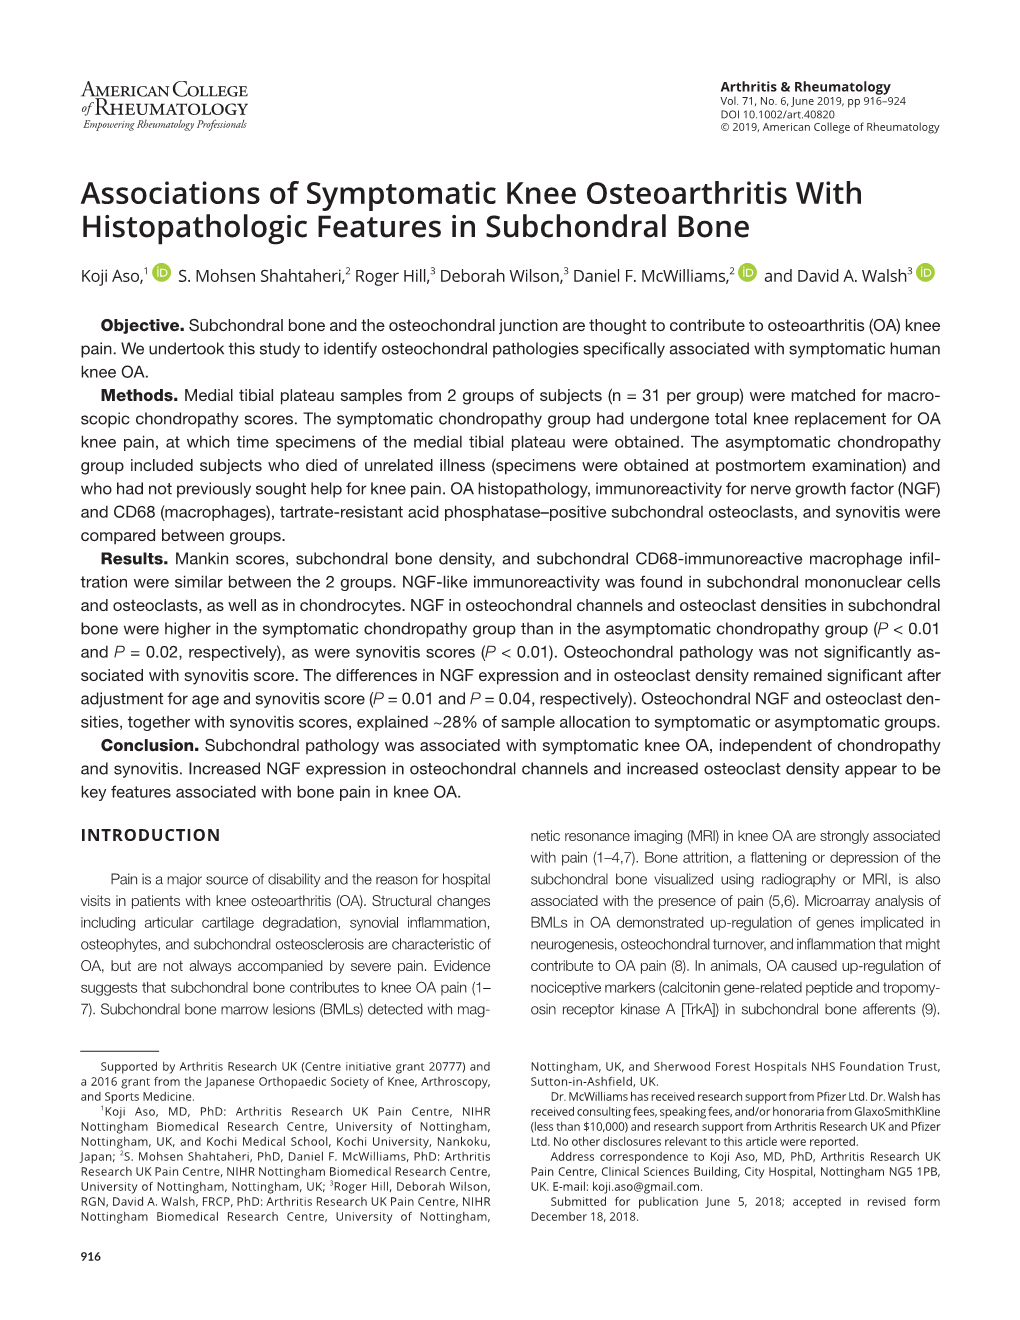 Associations of Symptomatic Knee Osteoarthritis with Histopathologic Features in Subchondral Bone